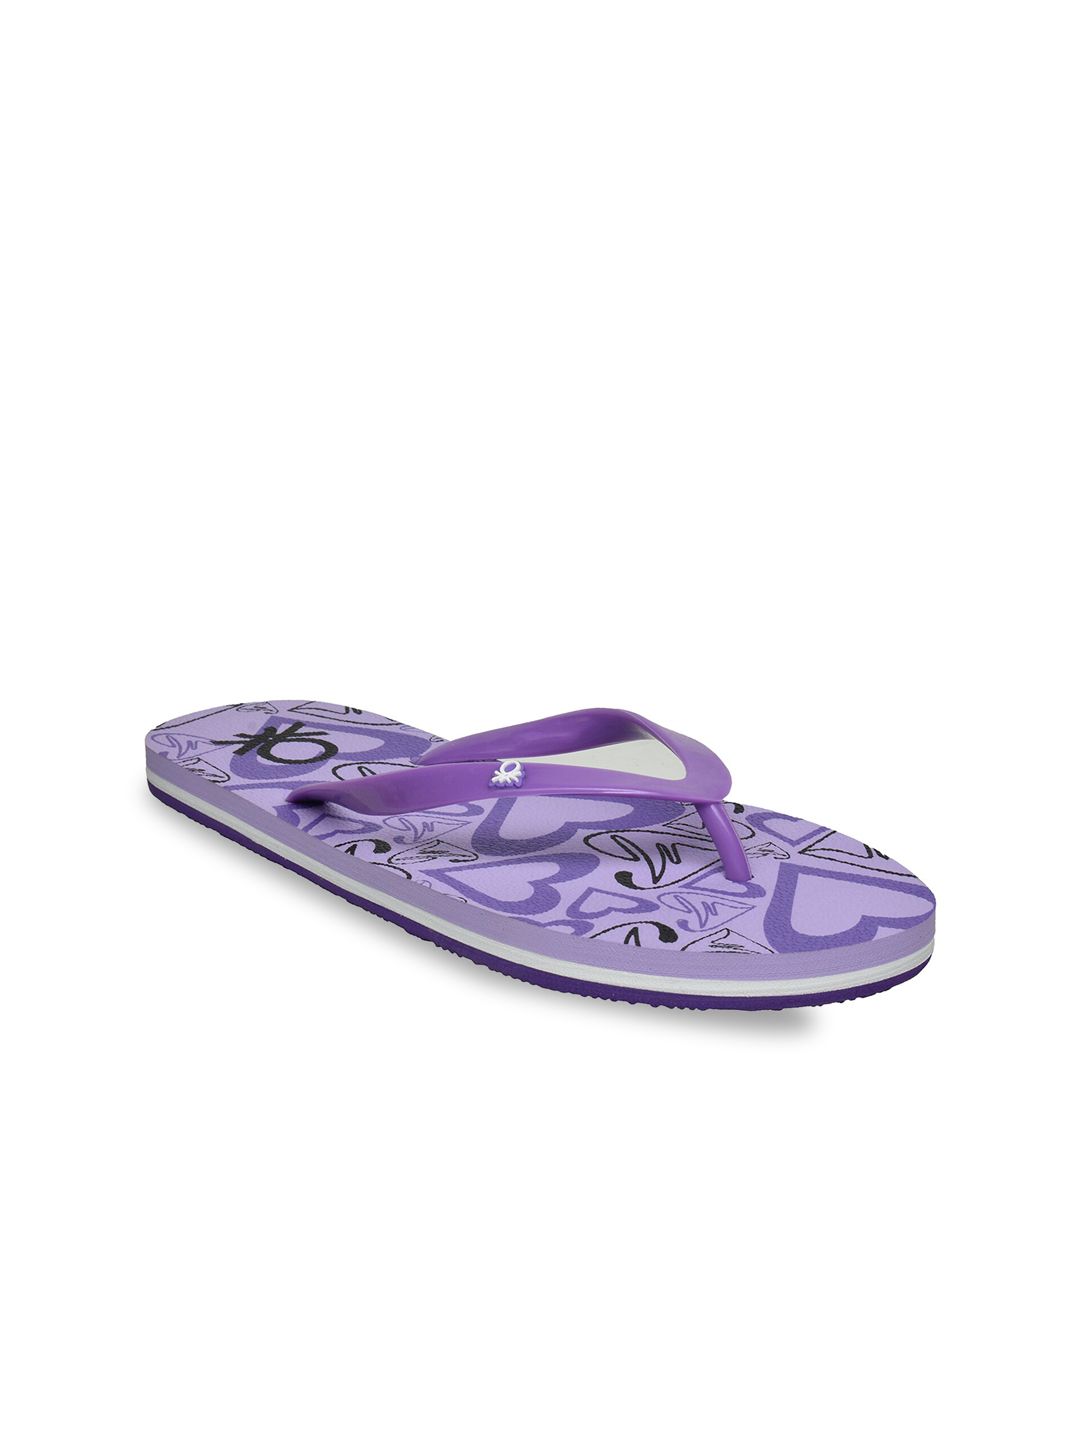 United Colors of Benetton Women Purple & Black Printed Rubber Thong Flip-Flops Price in India